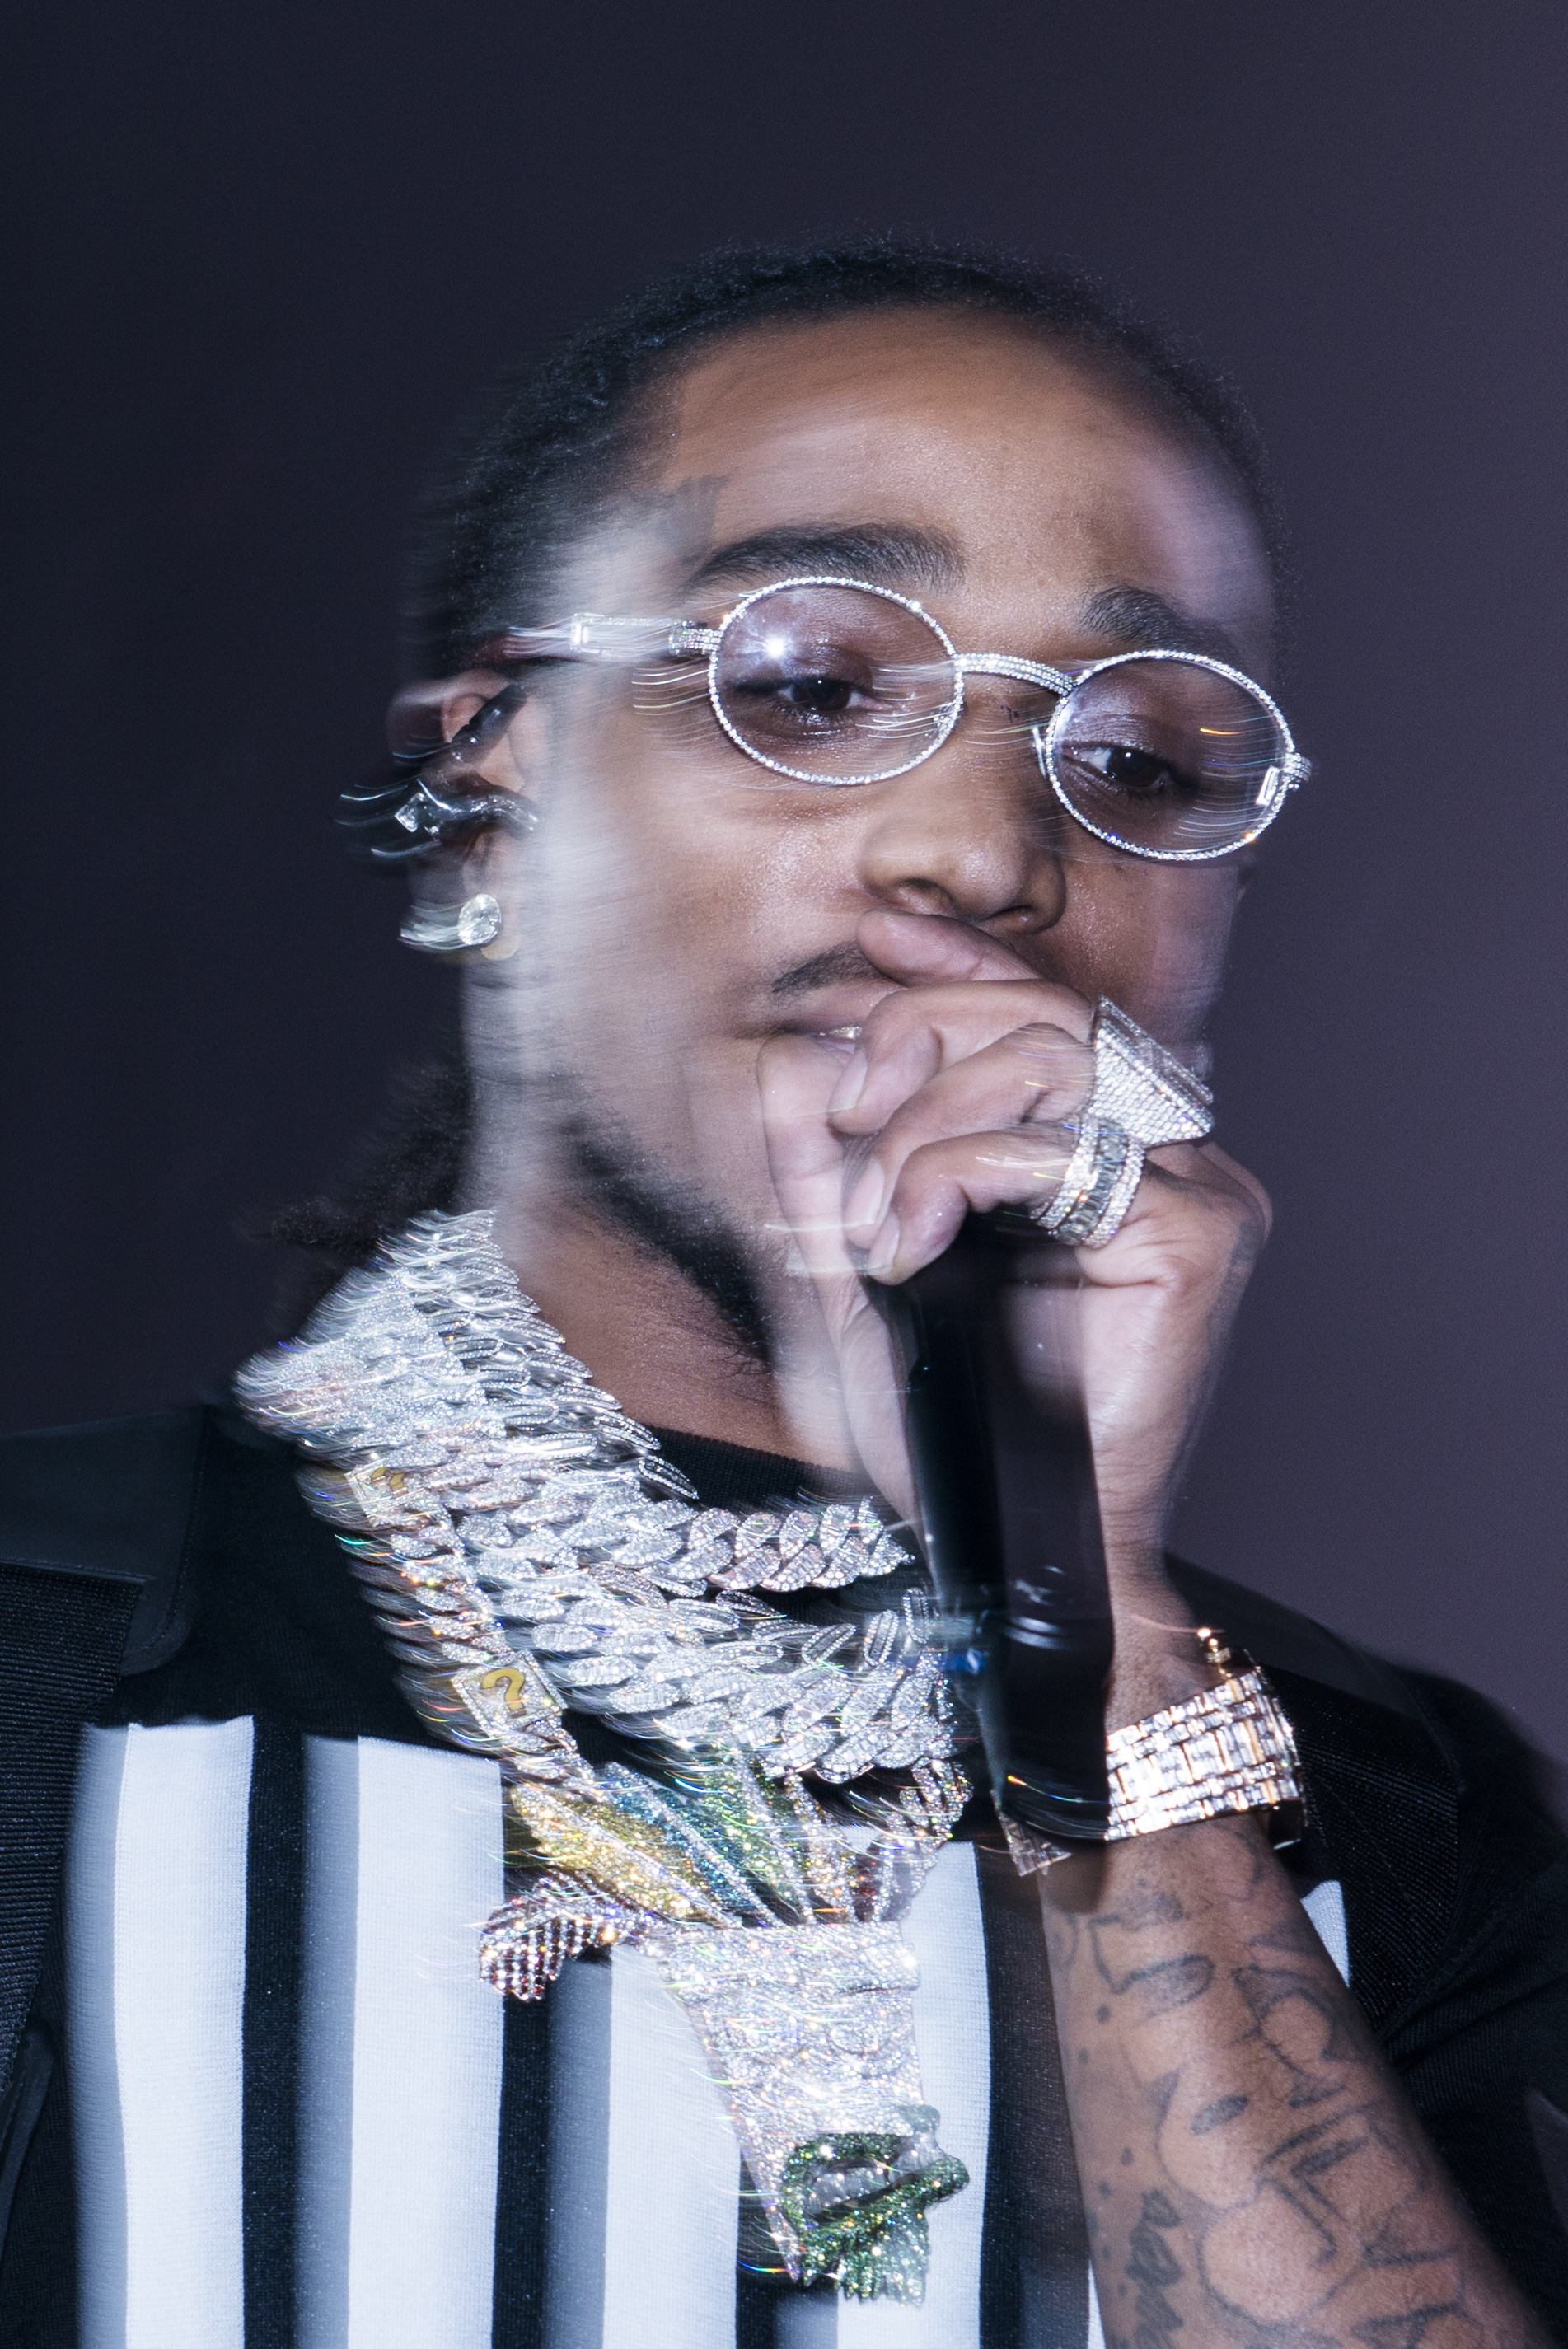 Quavo photographed by Aviva Klein- copyright 2021